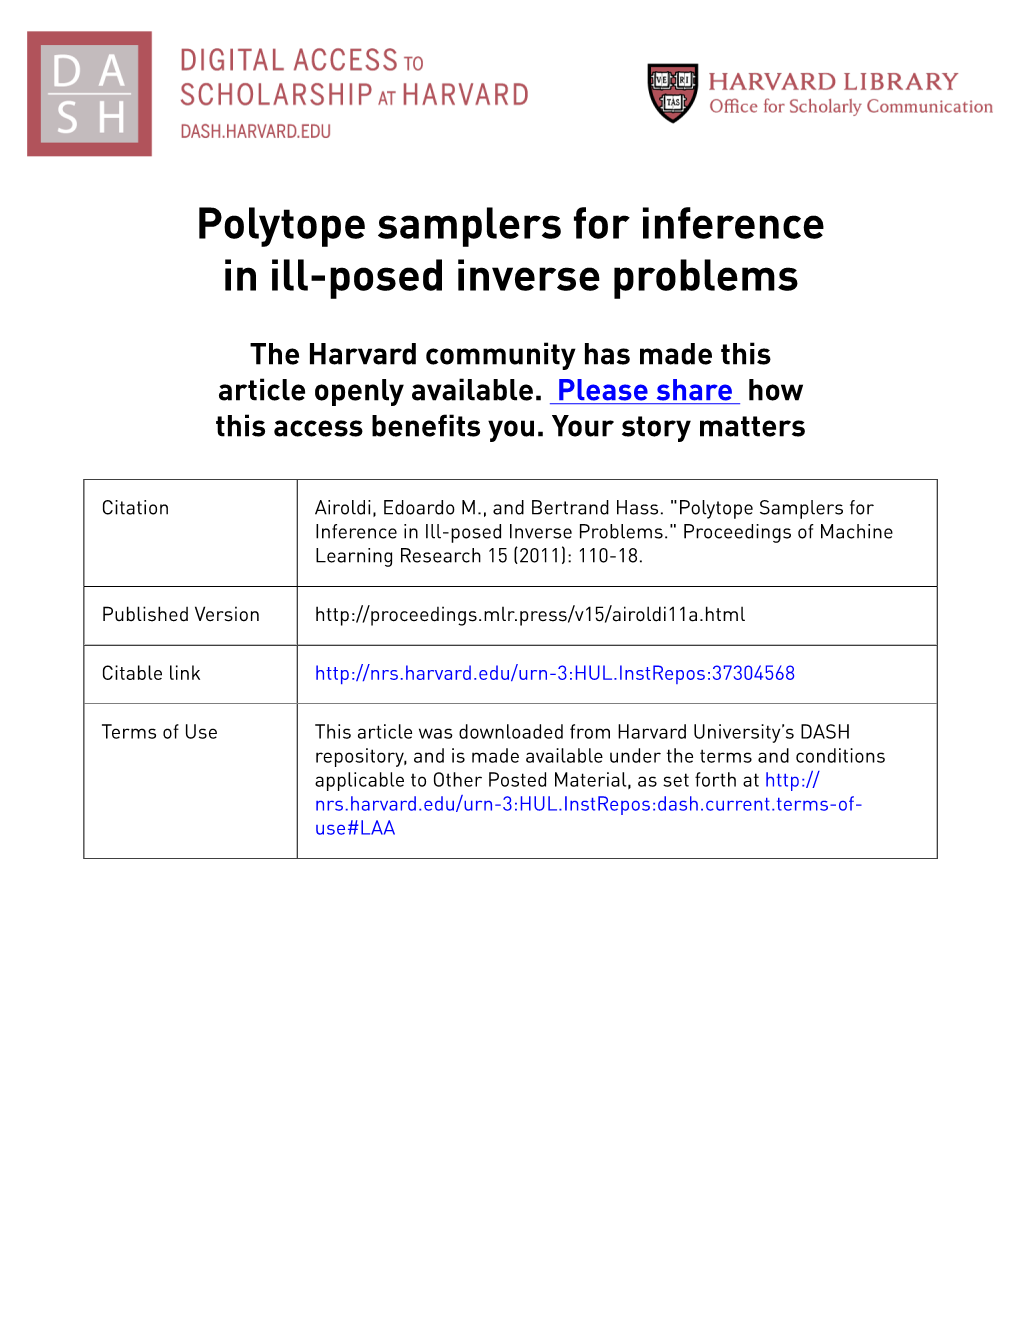 Polytope Samplers for Inference in Ill-Posed Inverse Problems